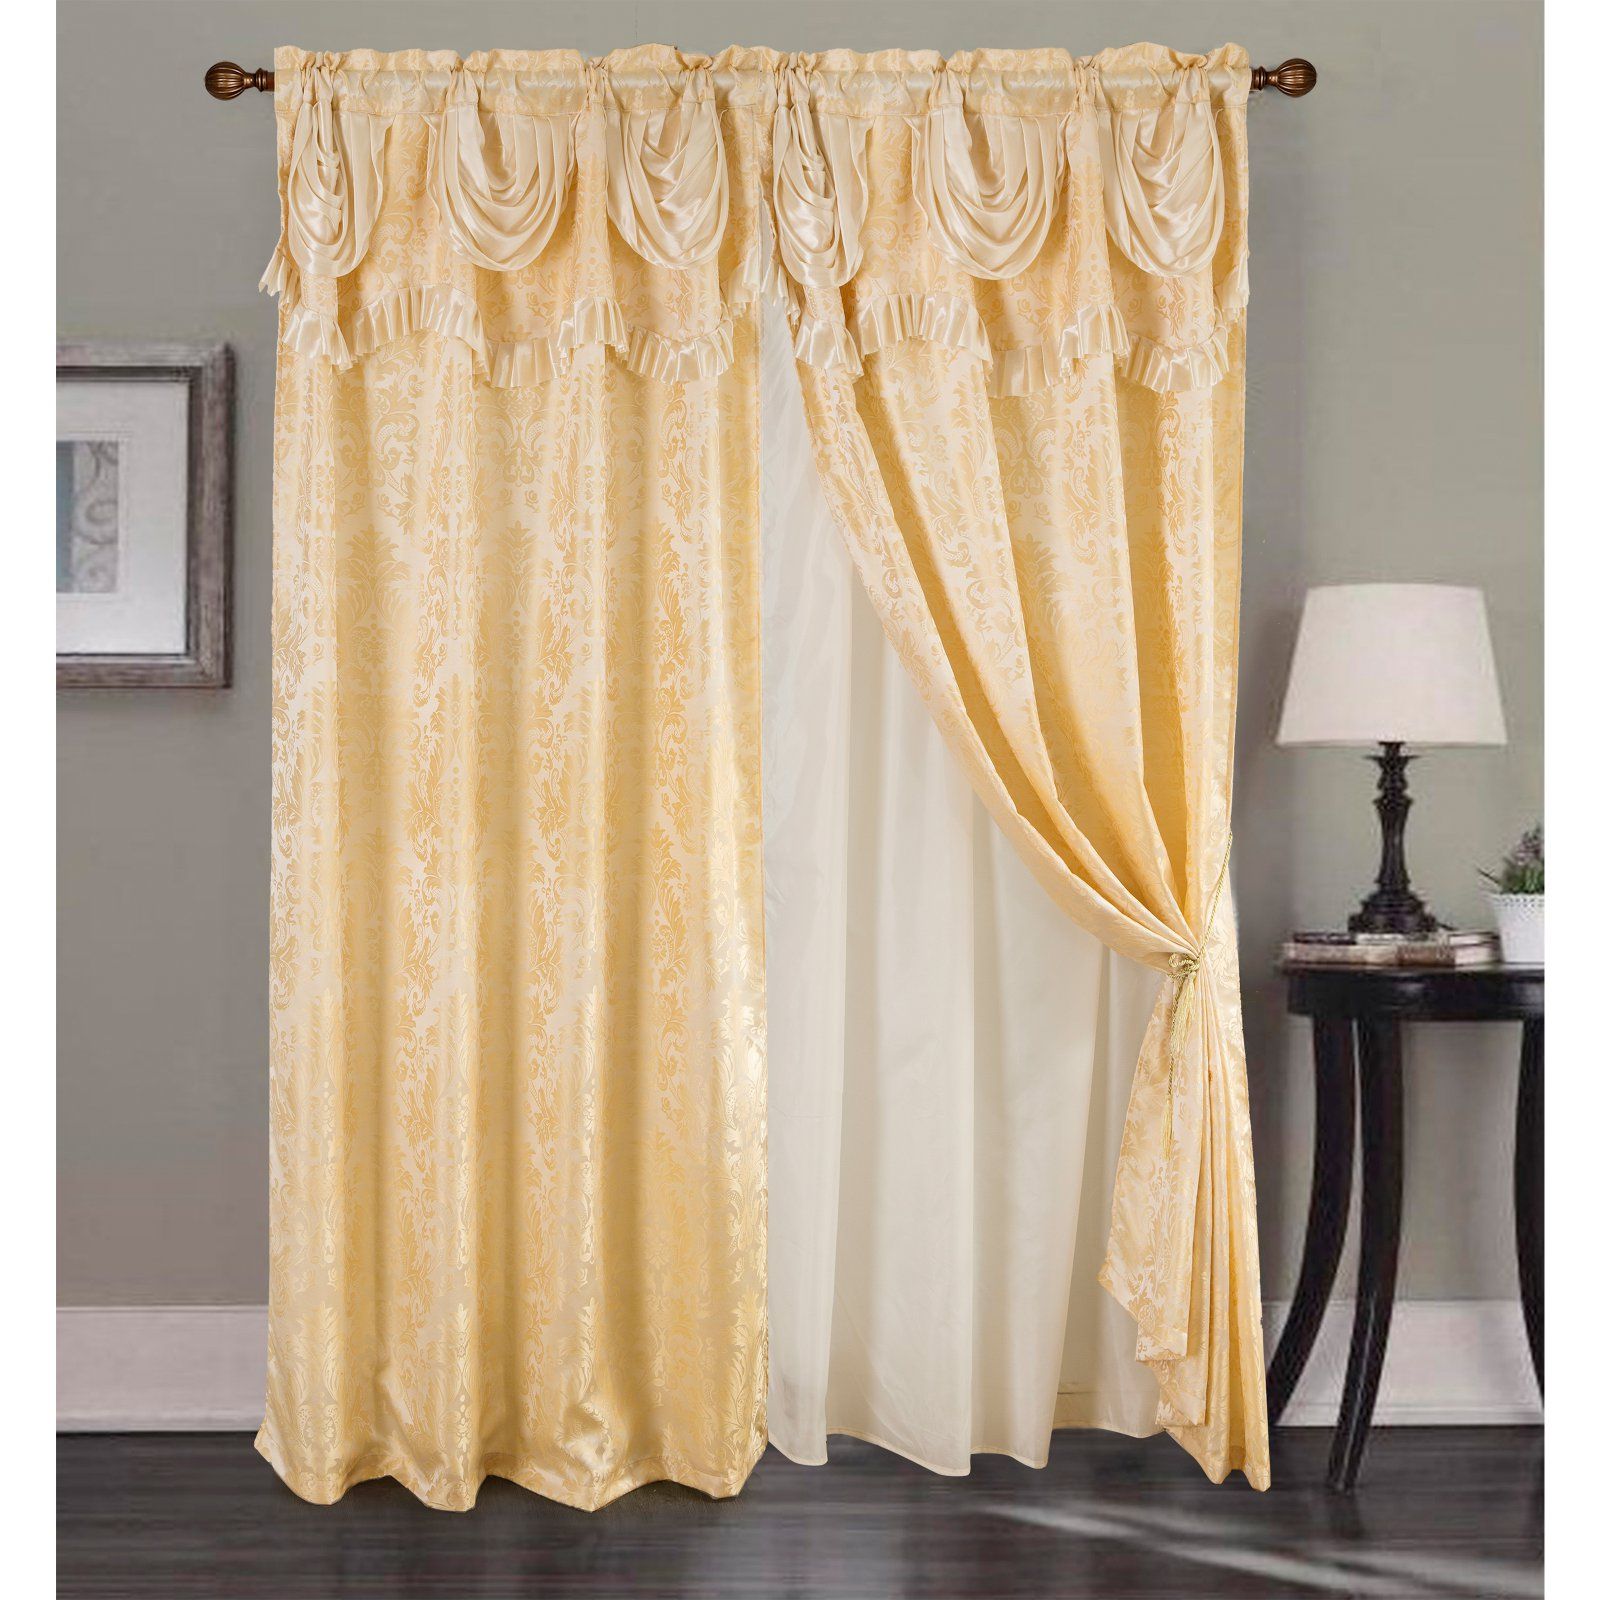 Single Curtain Panels Within Fashionable Sparta Jacquard 54 X 84 In. Rod Pocket Single Curtain Panel W/ Attached 18  In (View 15 of 20)